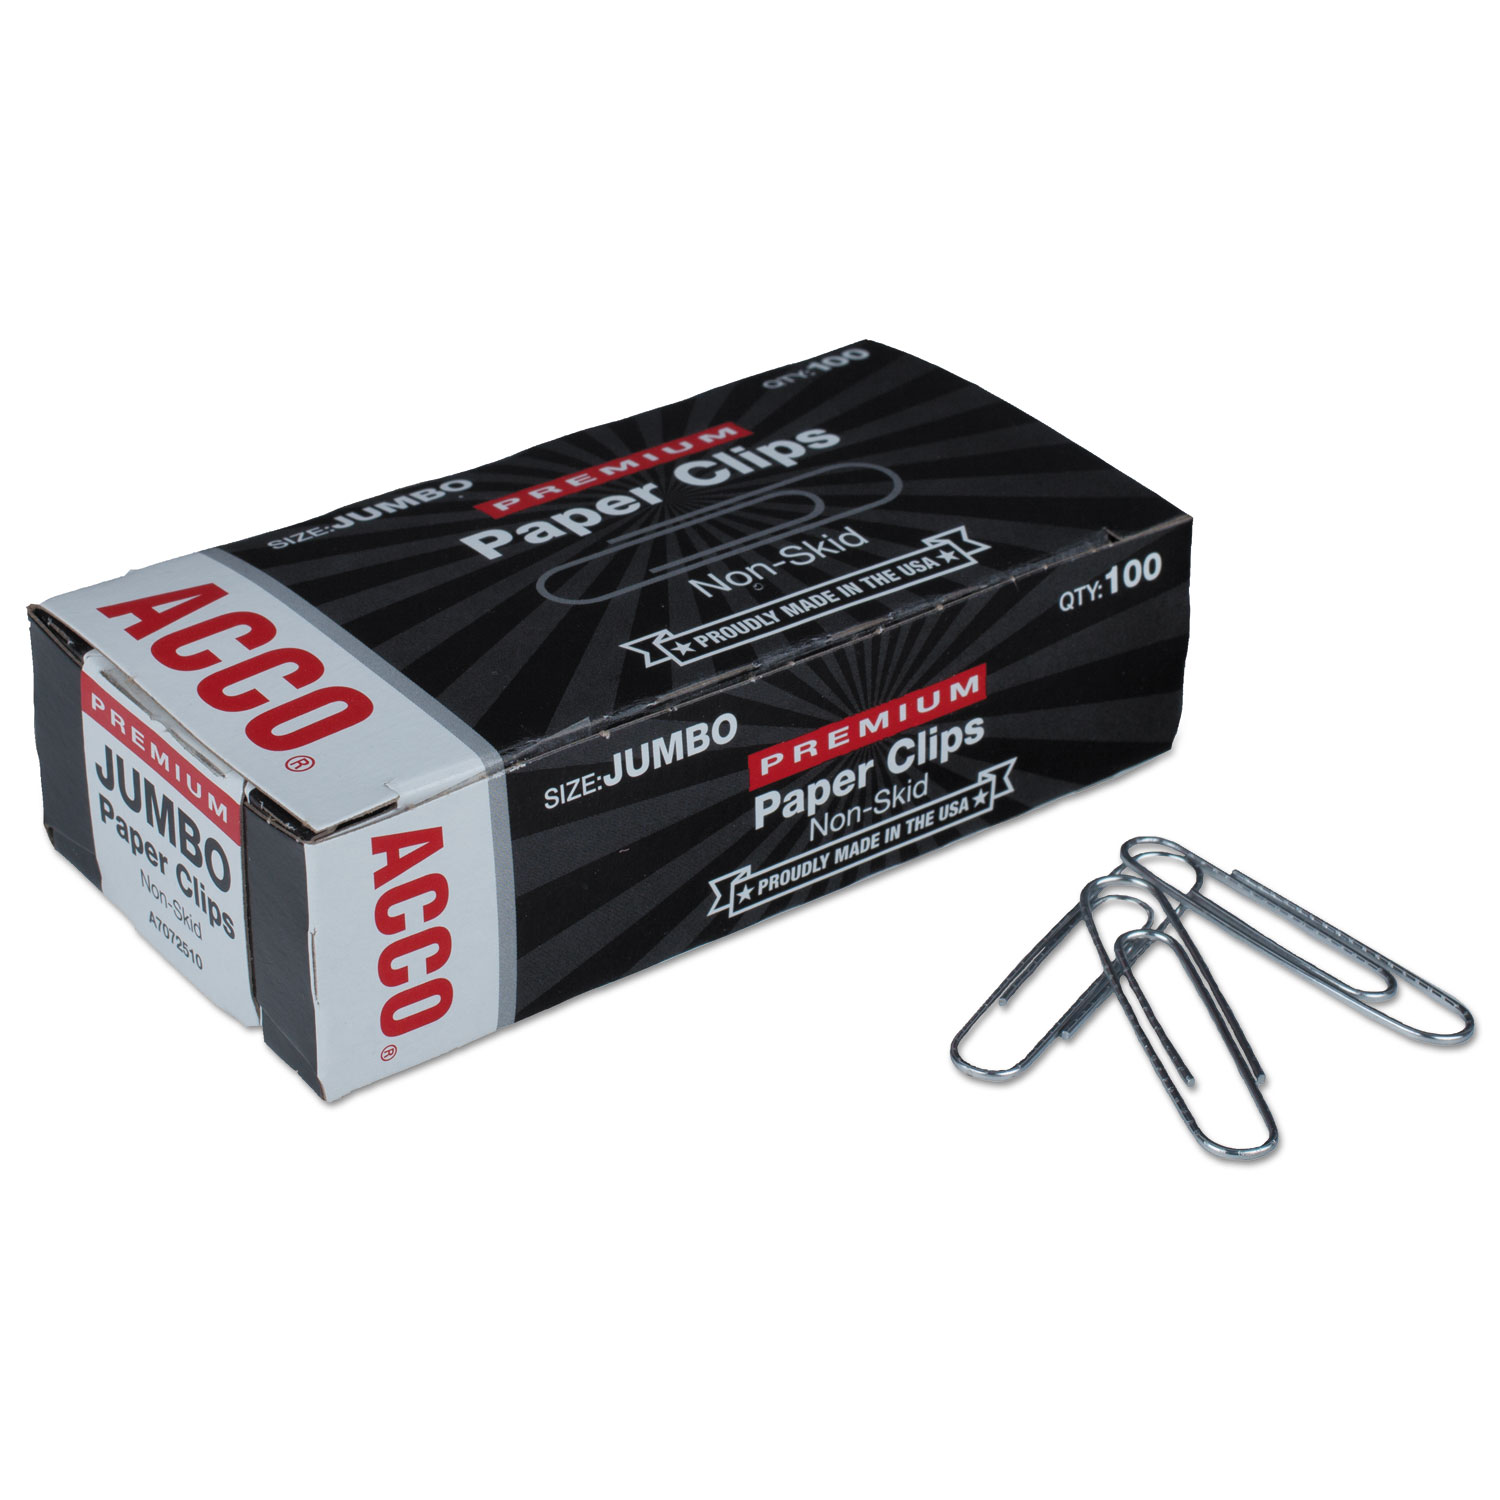  ACCO A7072510G Paper Clips, Jumbo, Silver, 1,000/Pack (ACC72510) 